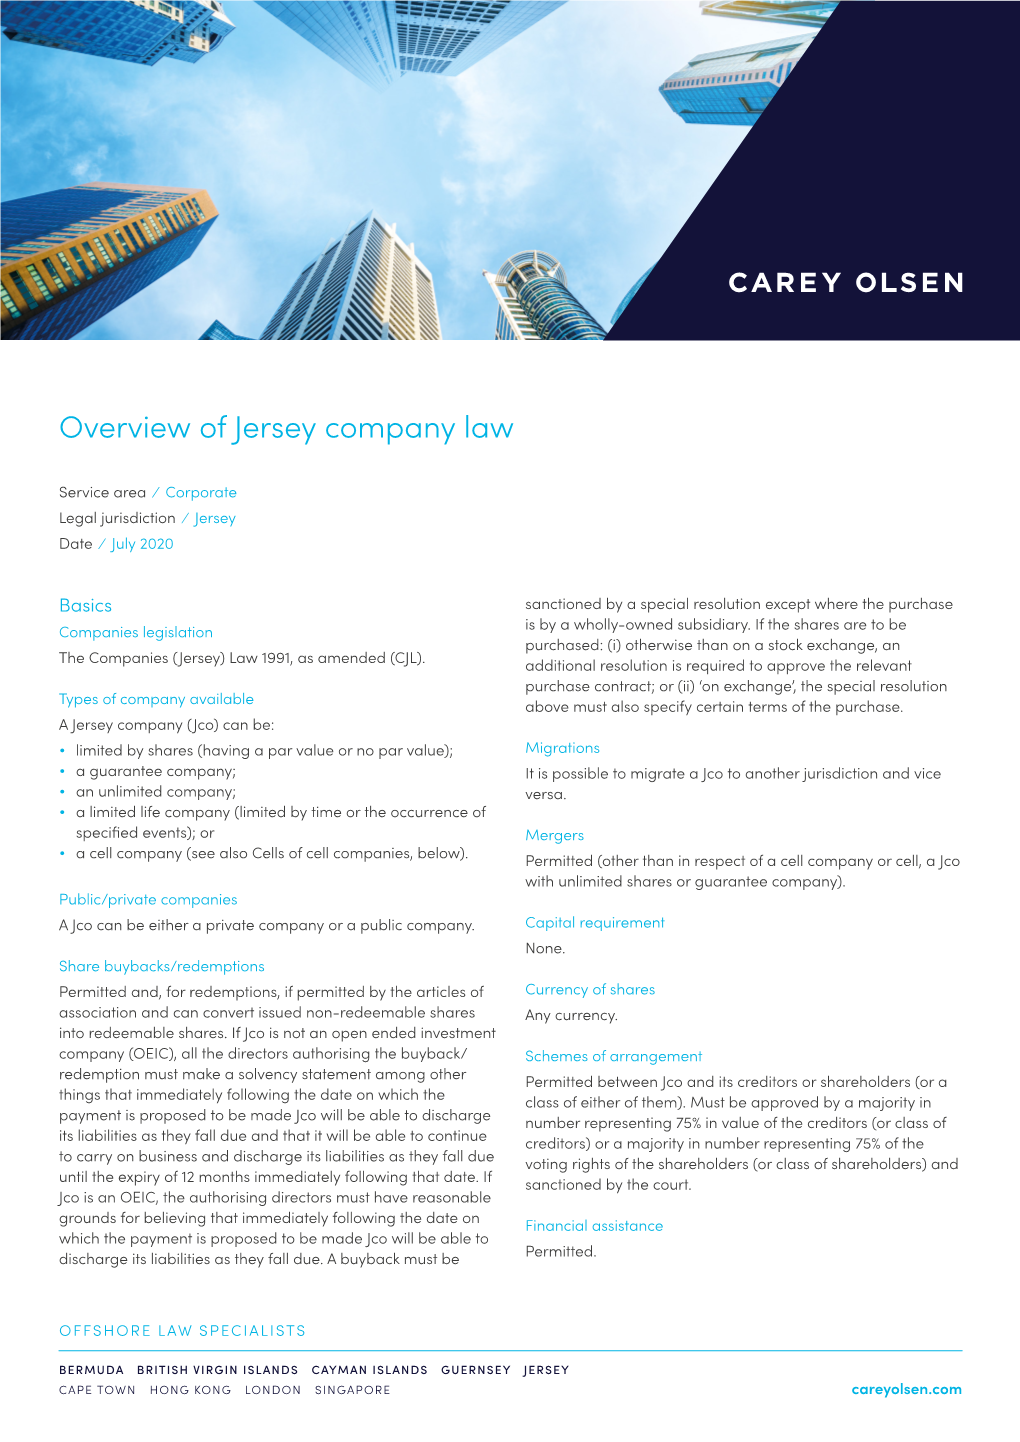 Overview of Jersey Company Law